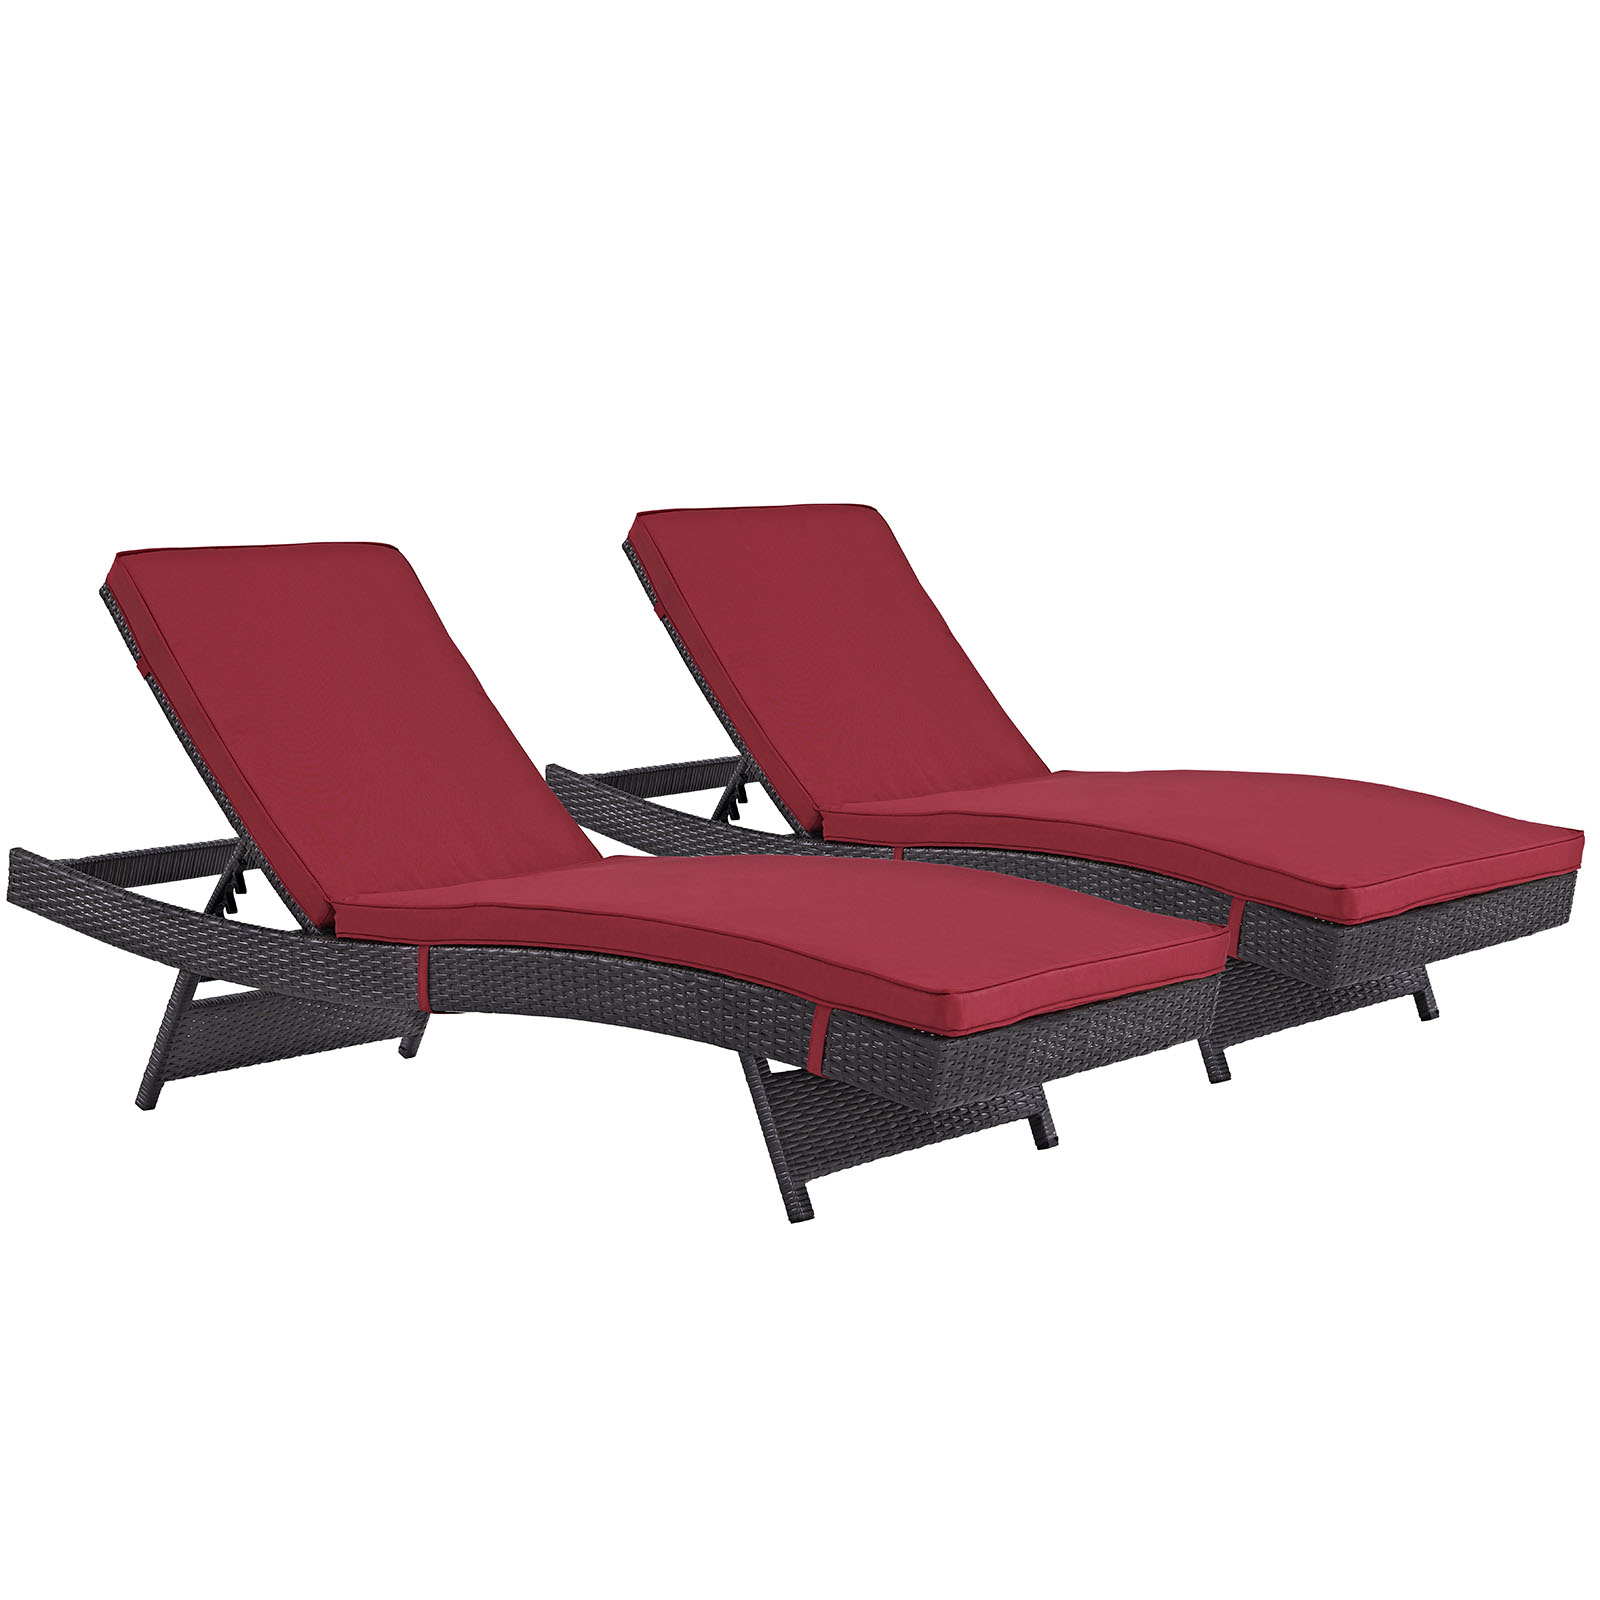 Modway Convene Chaise Outdoor Patio Set of 2 in Espresso Red - image 2 of 4